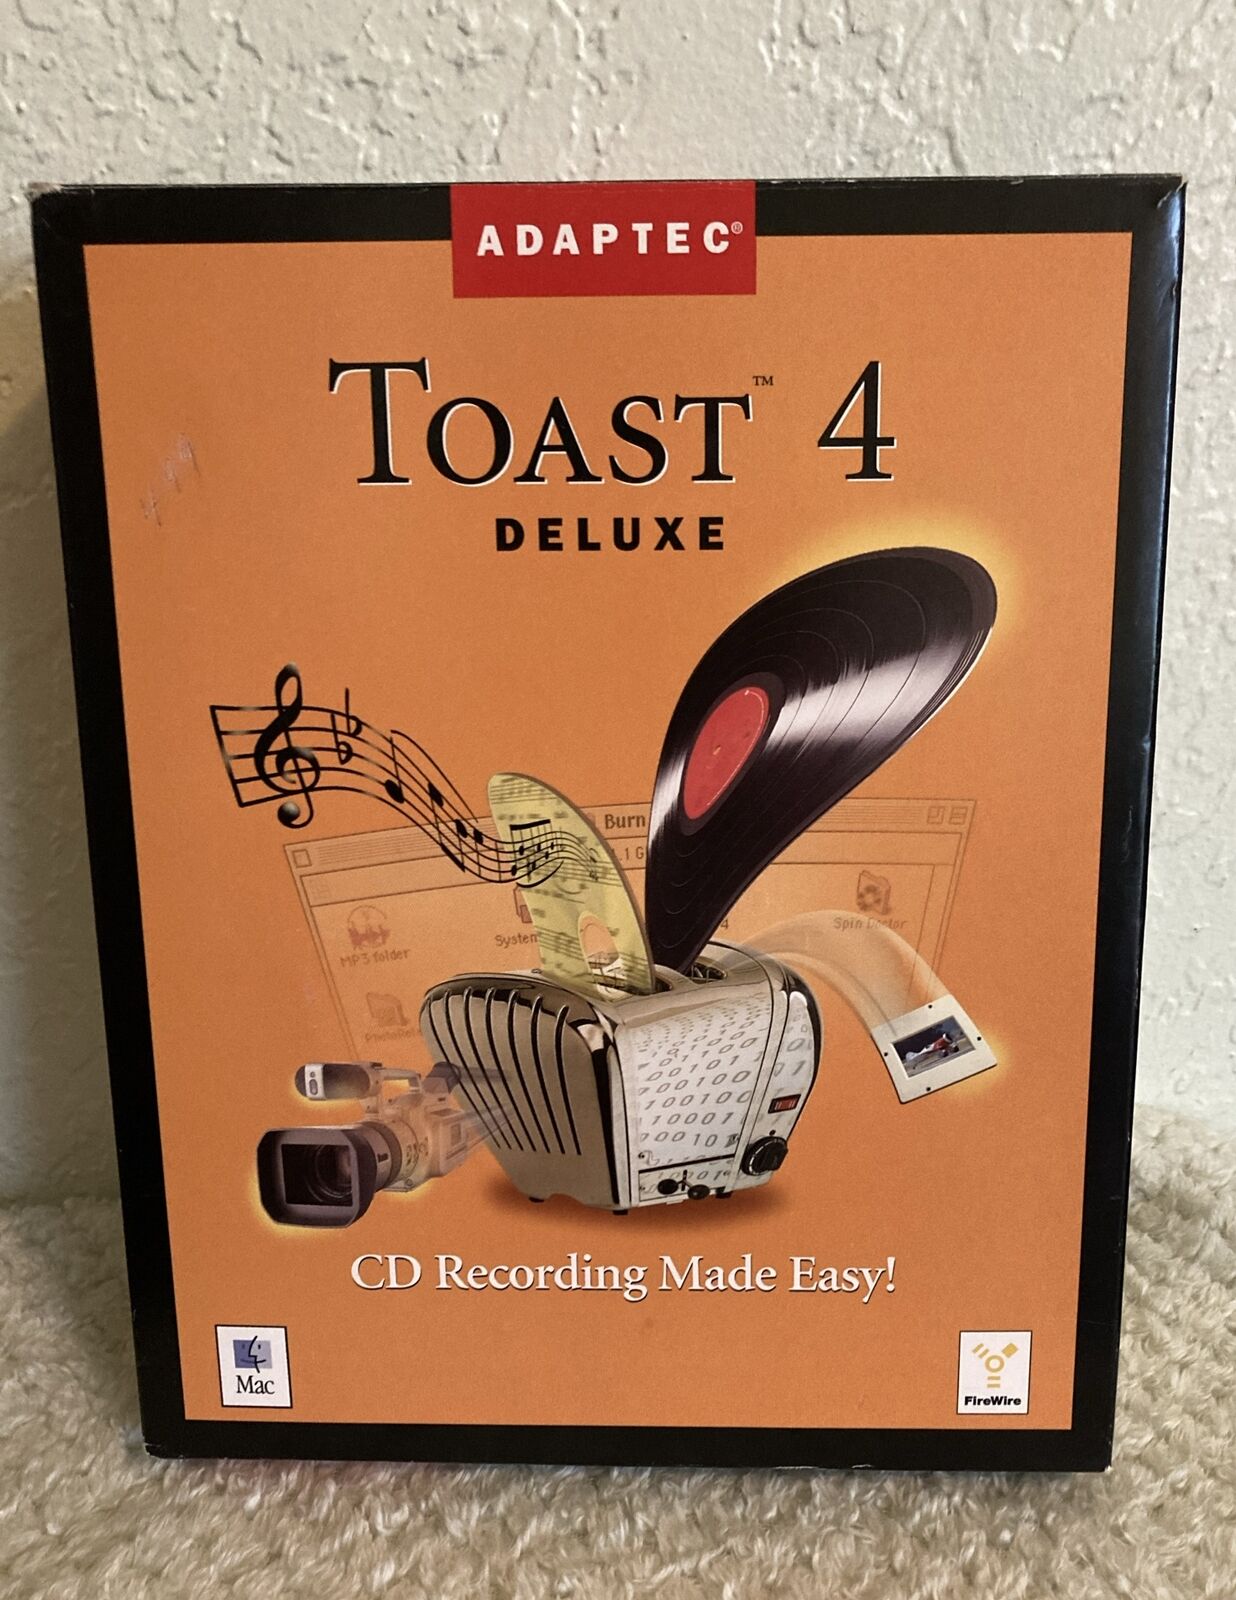 Adaptec Toast 4 Deluxe Software for Mac Big Box CD Recording